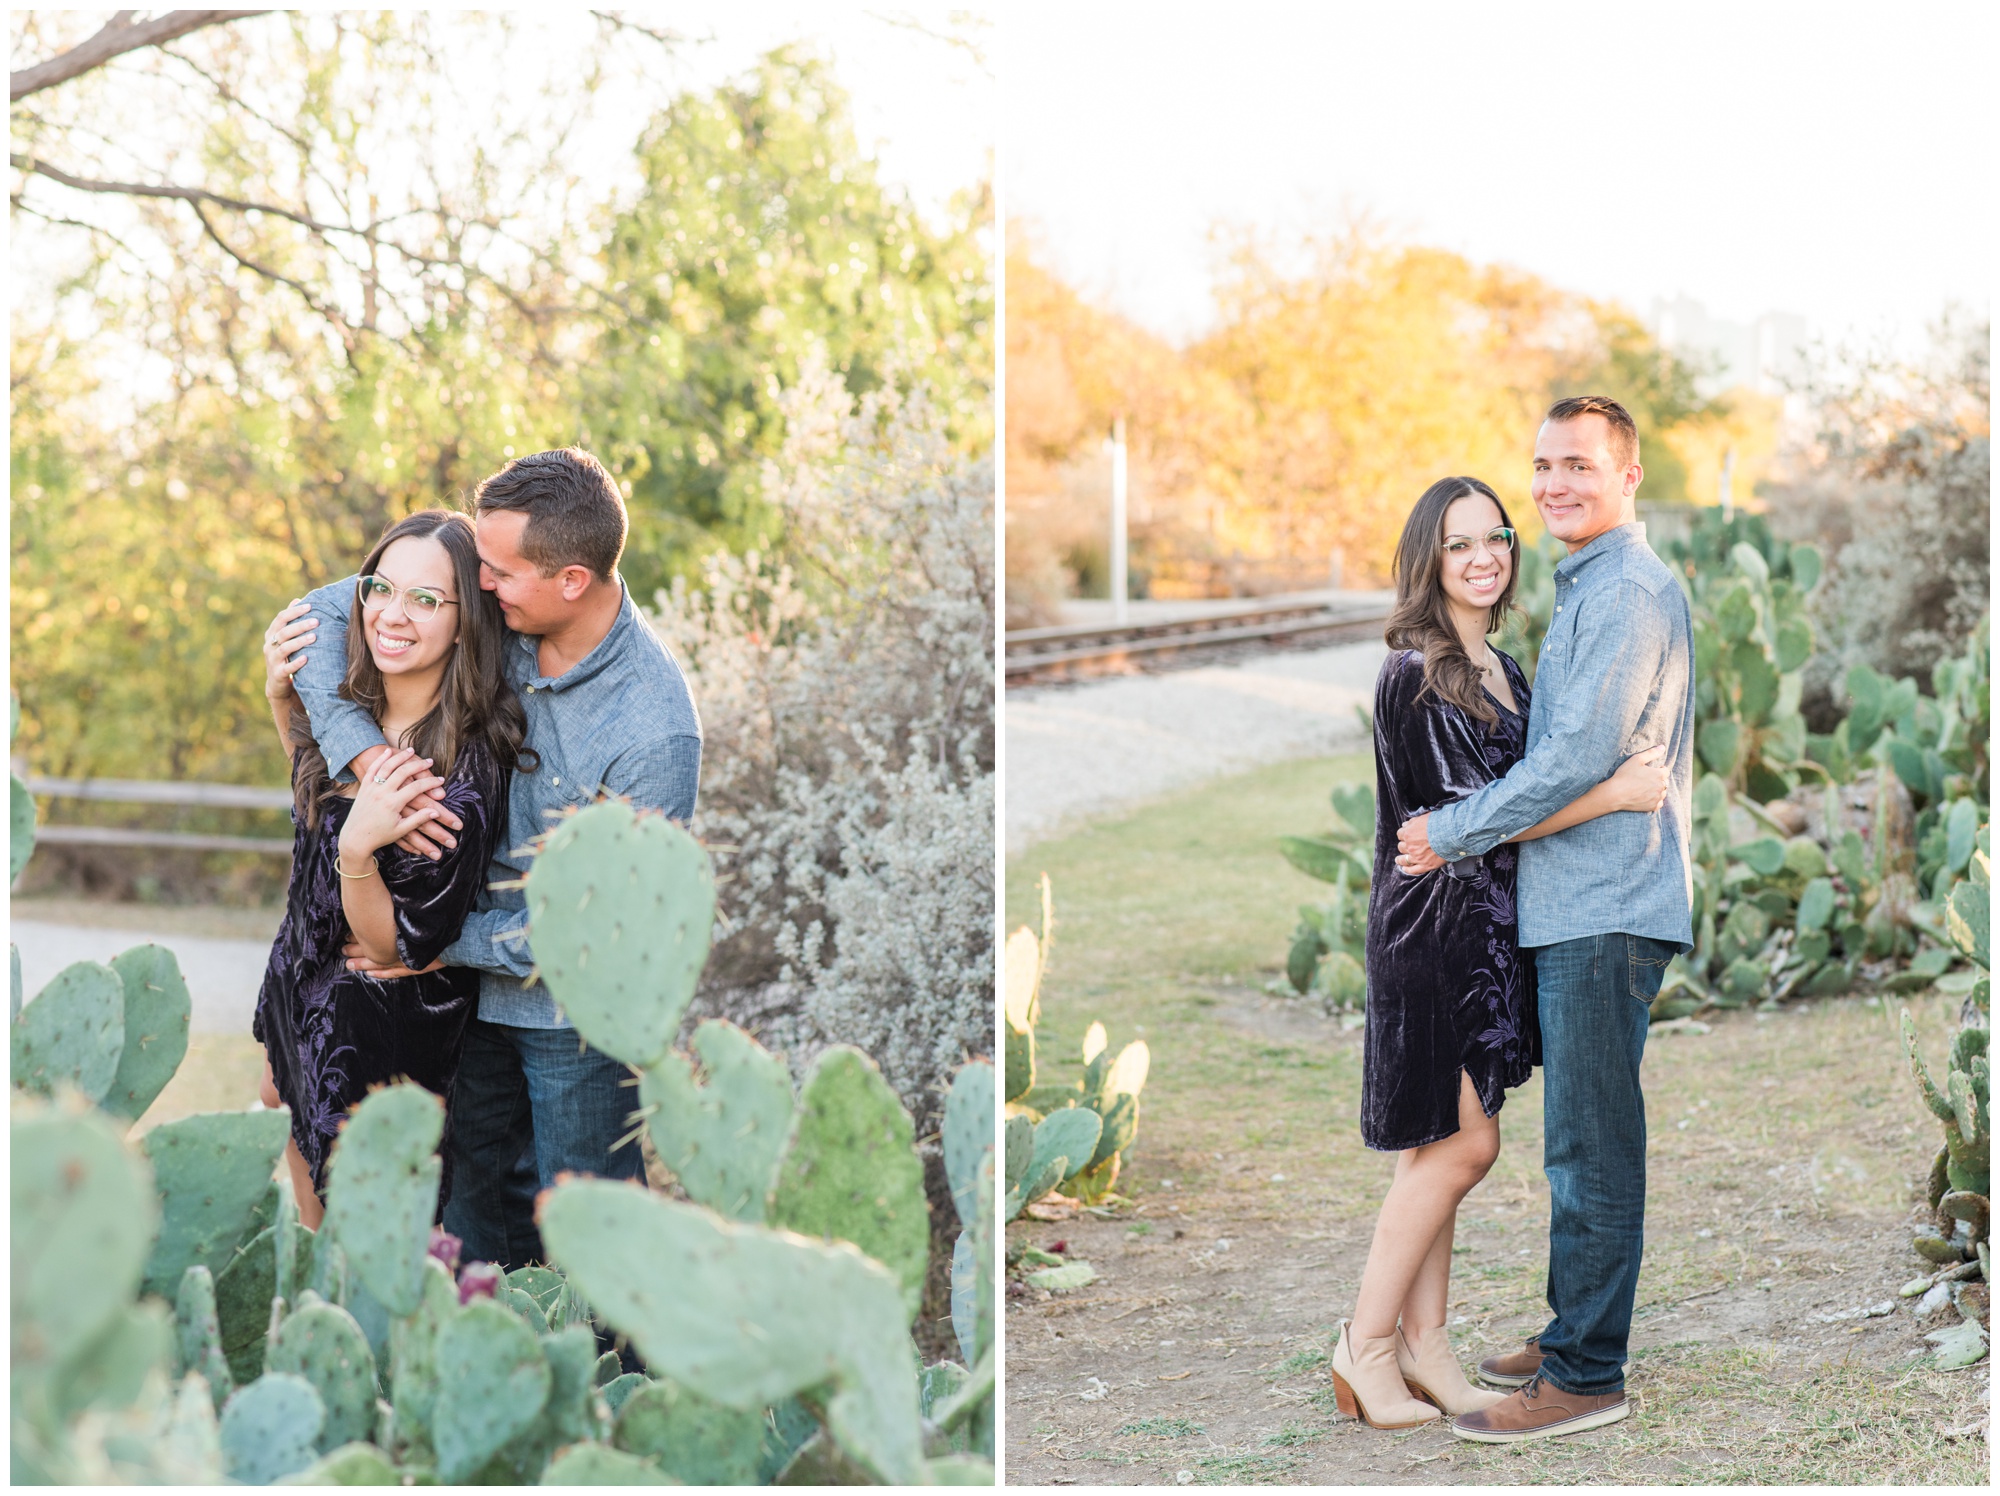 Fort Worth Stockyards | Fort Worth Stockyards Cactus Garden | Fort Worth Couples Session | Fort Worth Anniversary Session | Fort Worth Cactus Garden | Lauren Grimes Photography | Fort Worth Couples Photographer